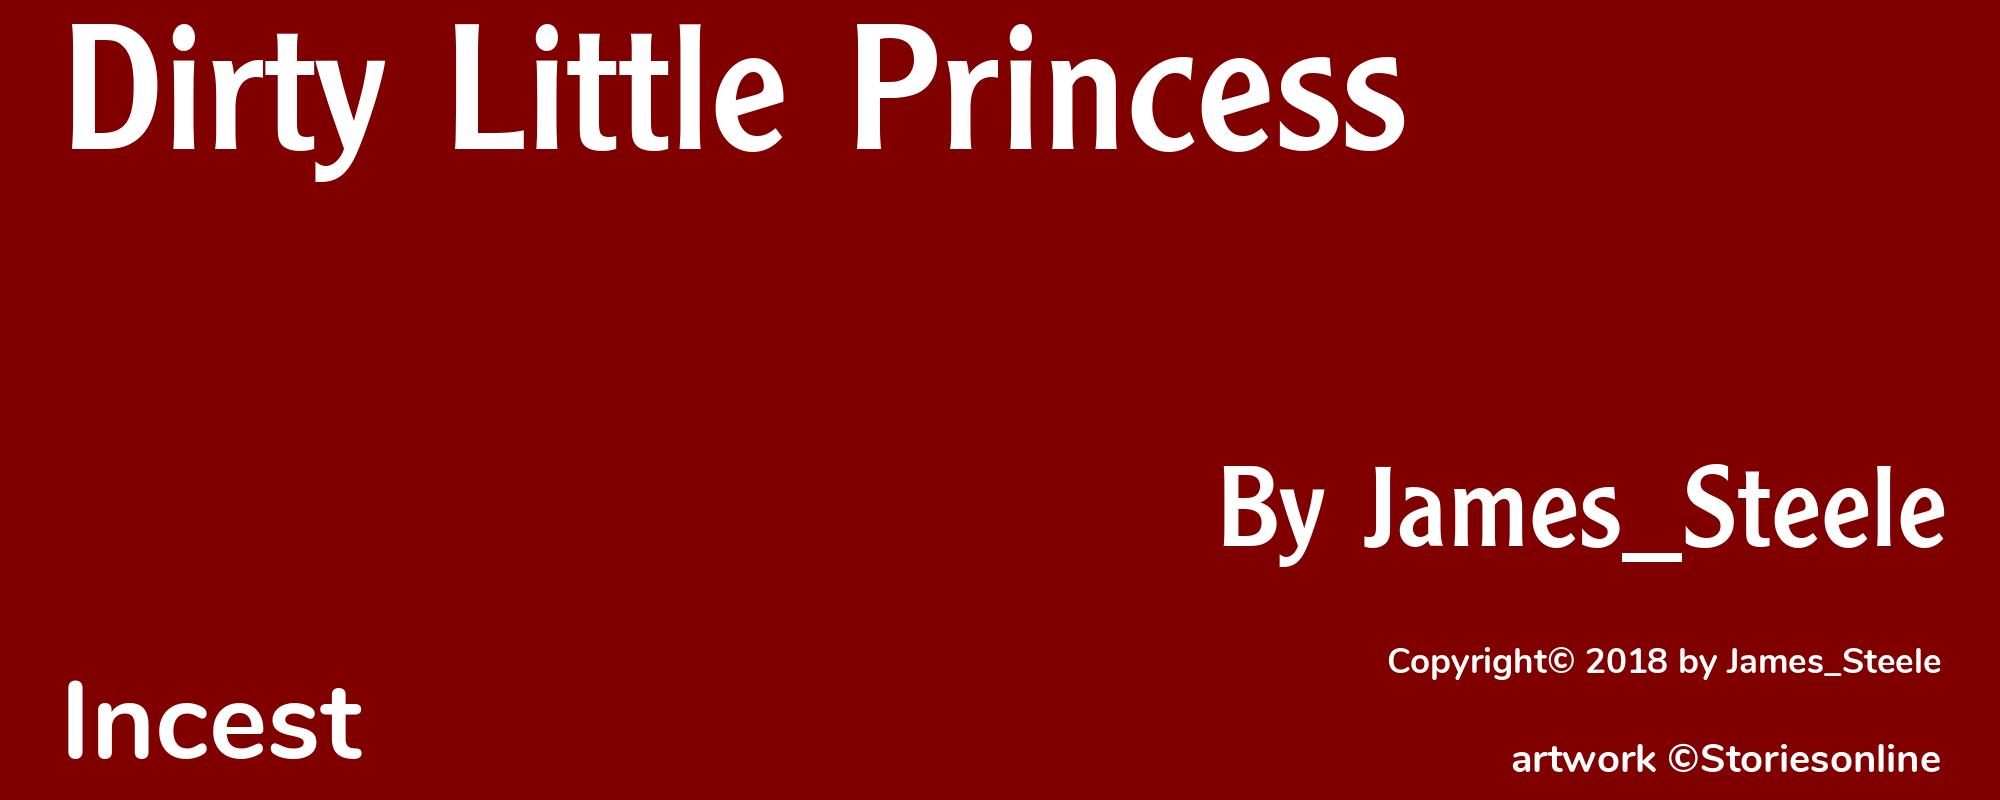 Dirty Little Princess - Cover